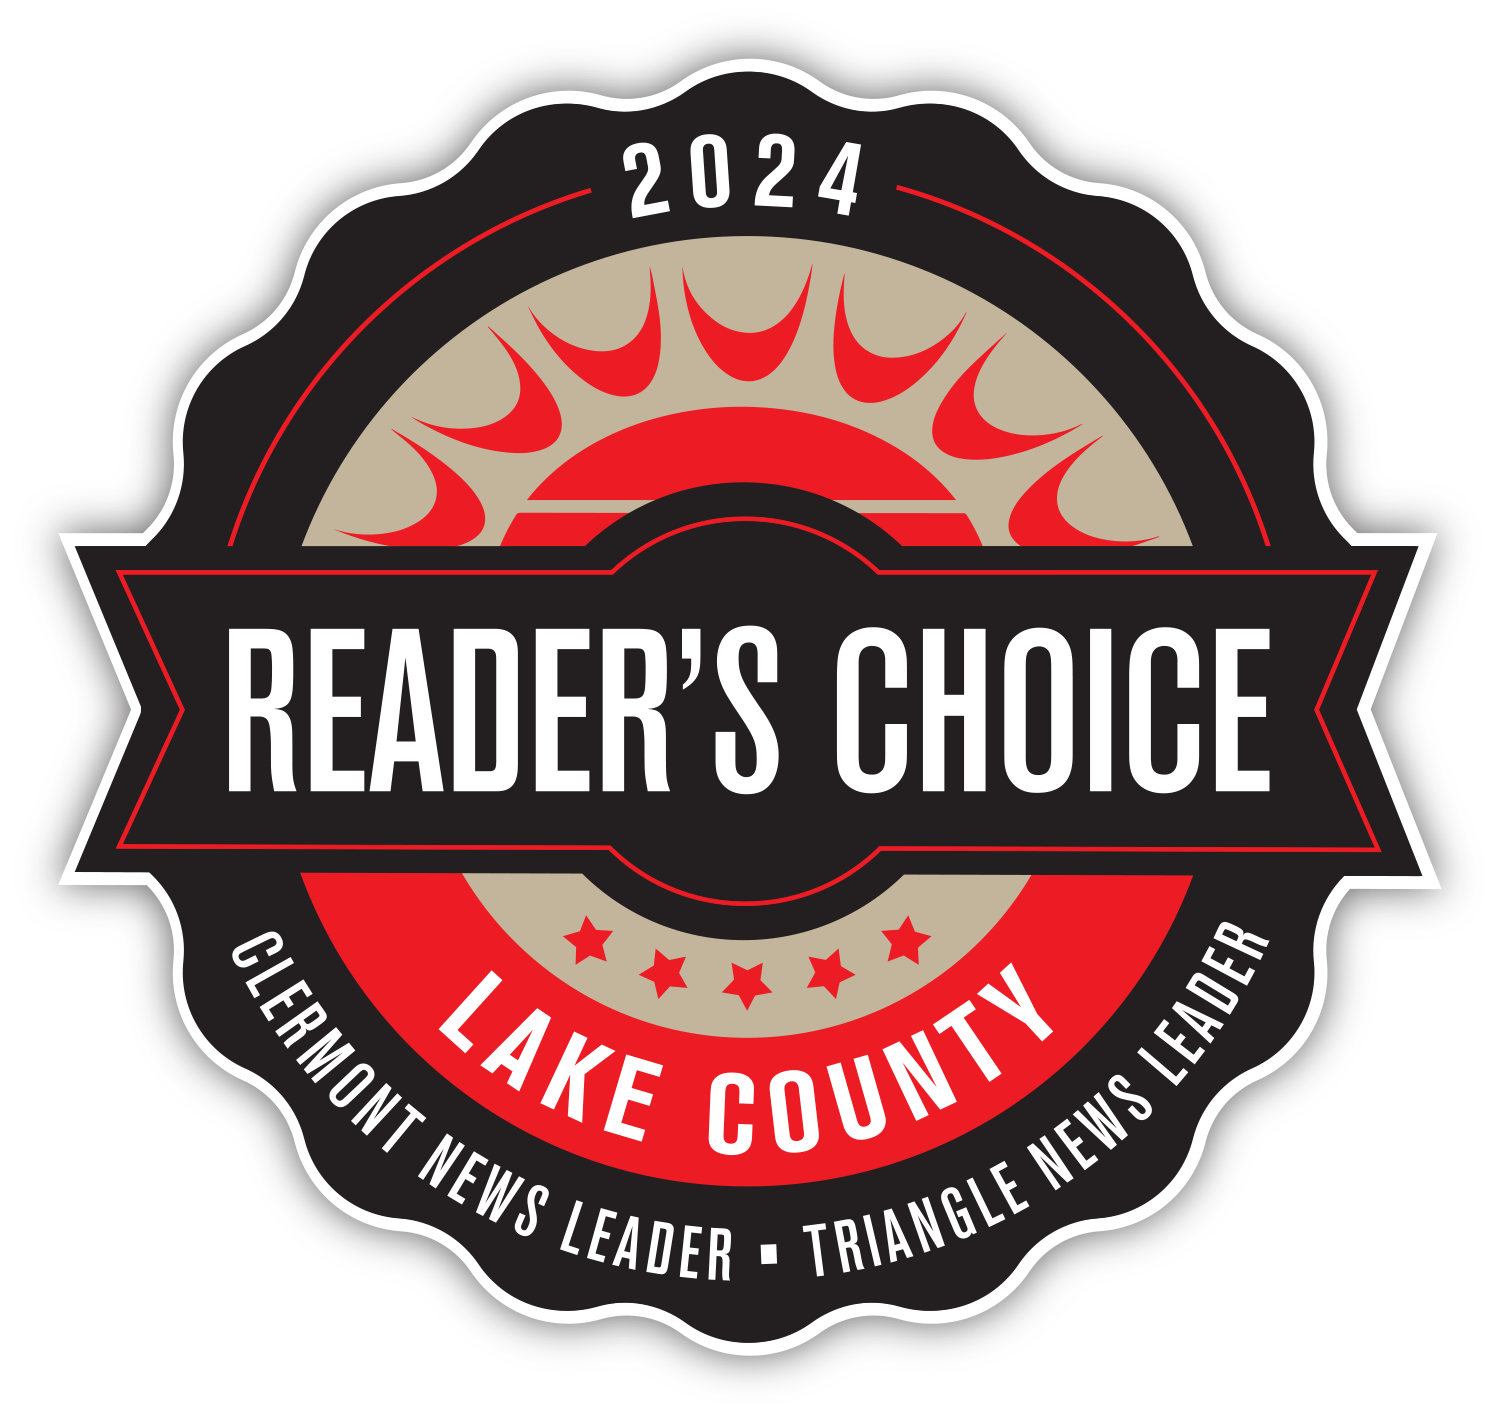 Nominate Us for Reader's Choice!